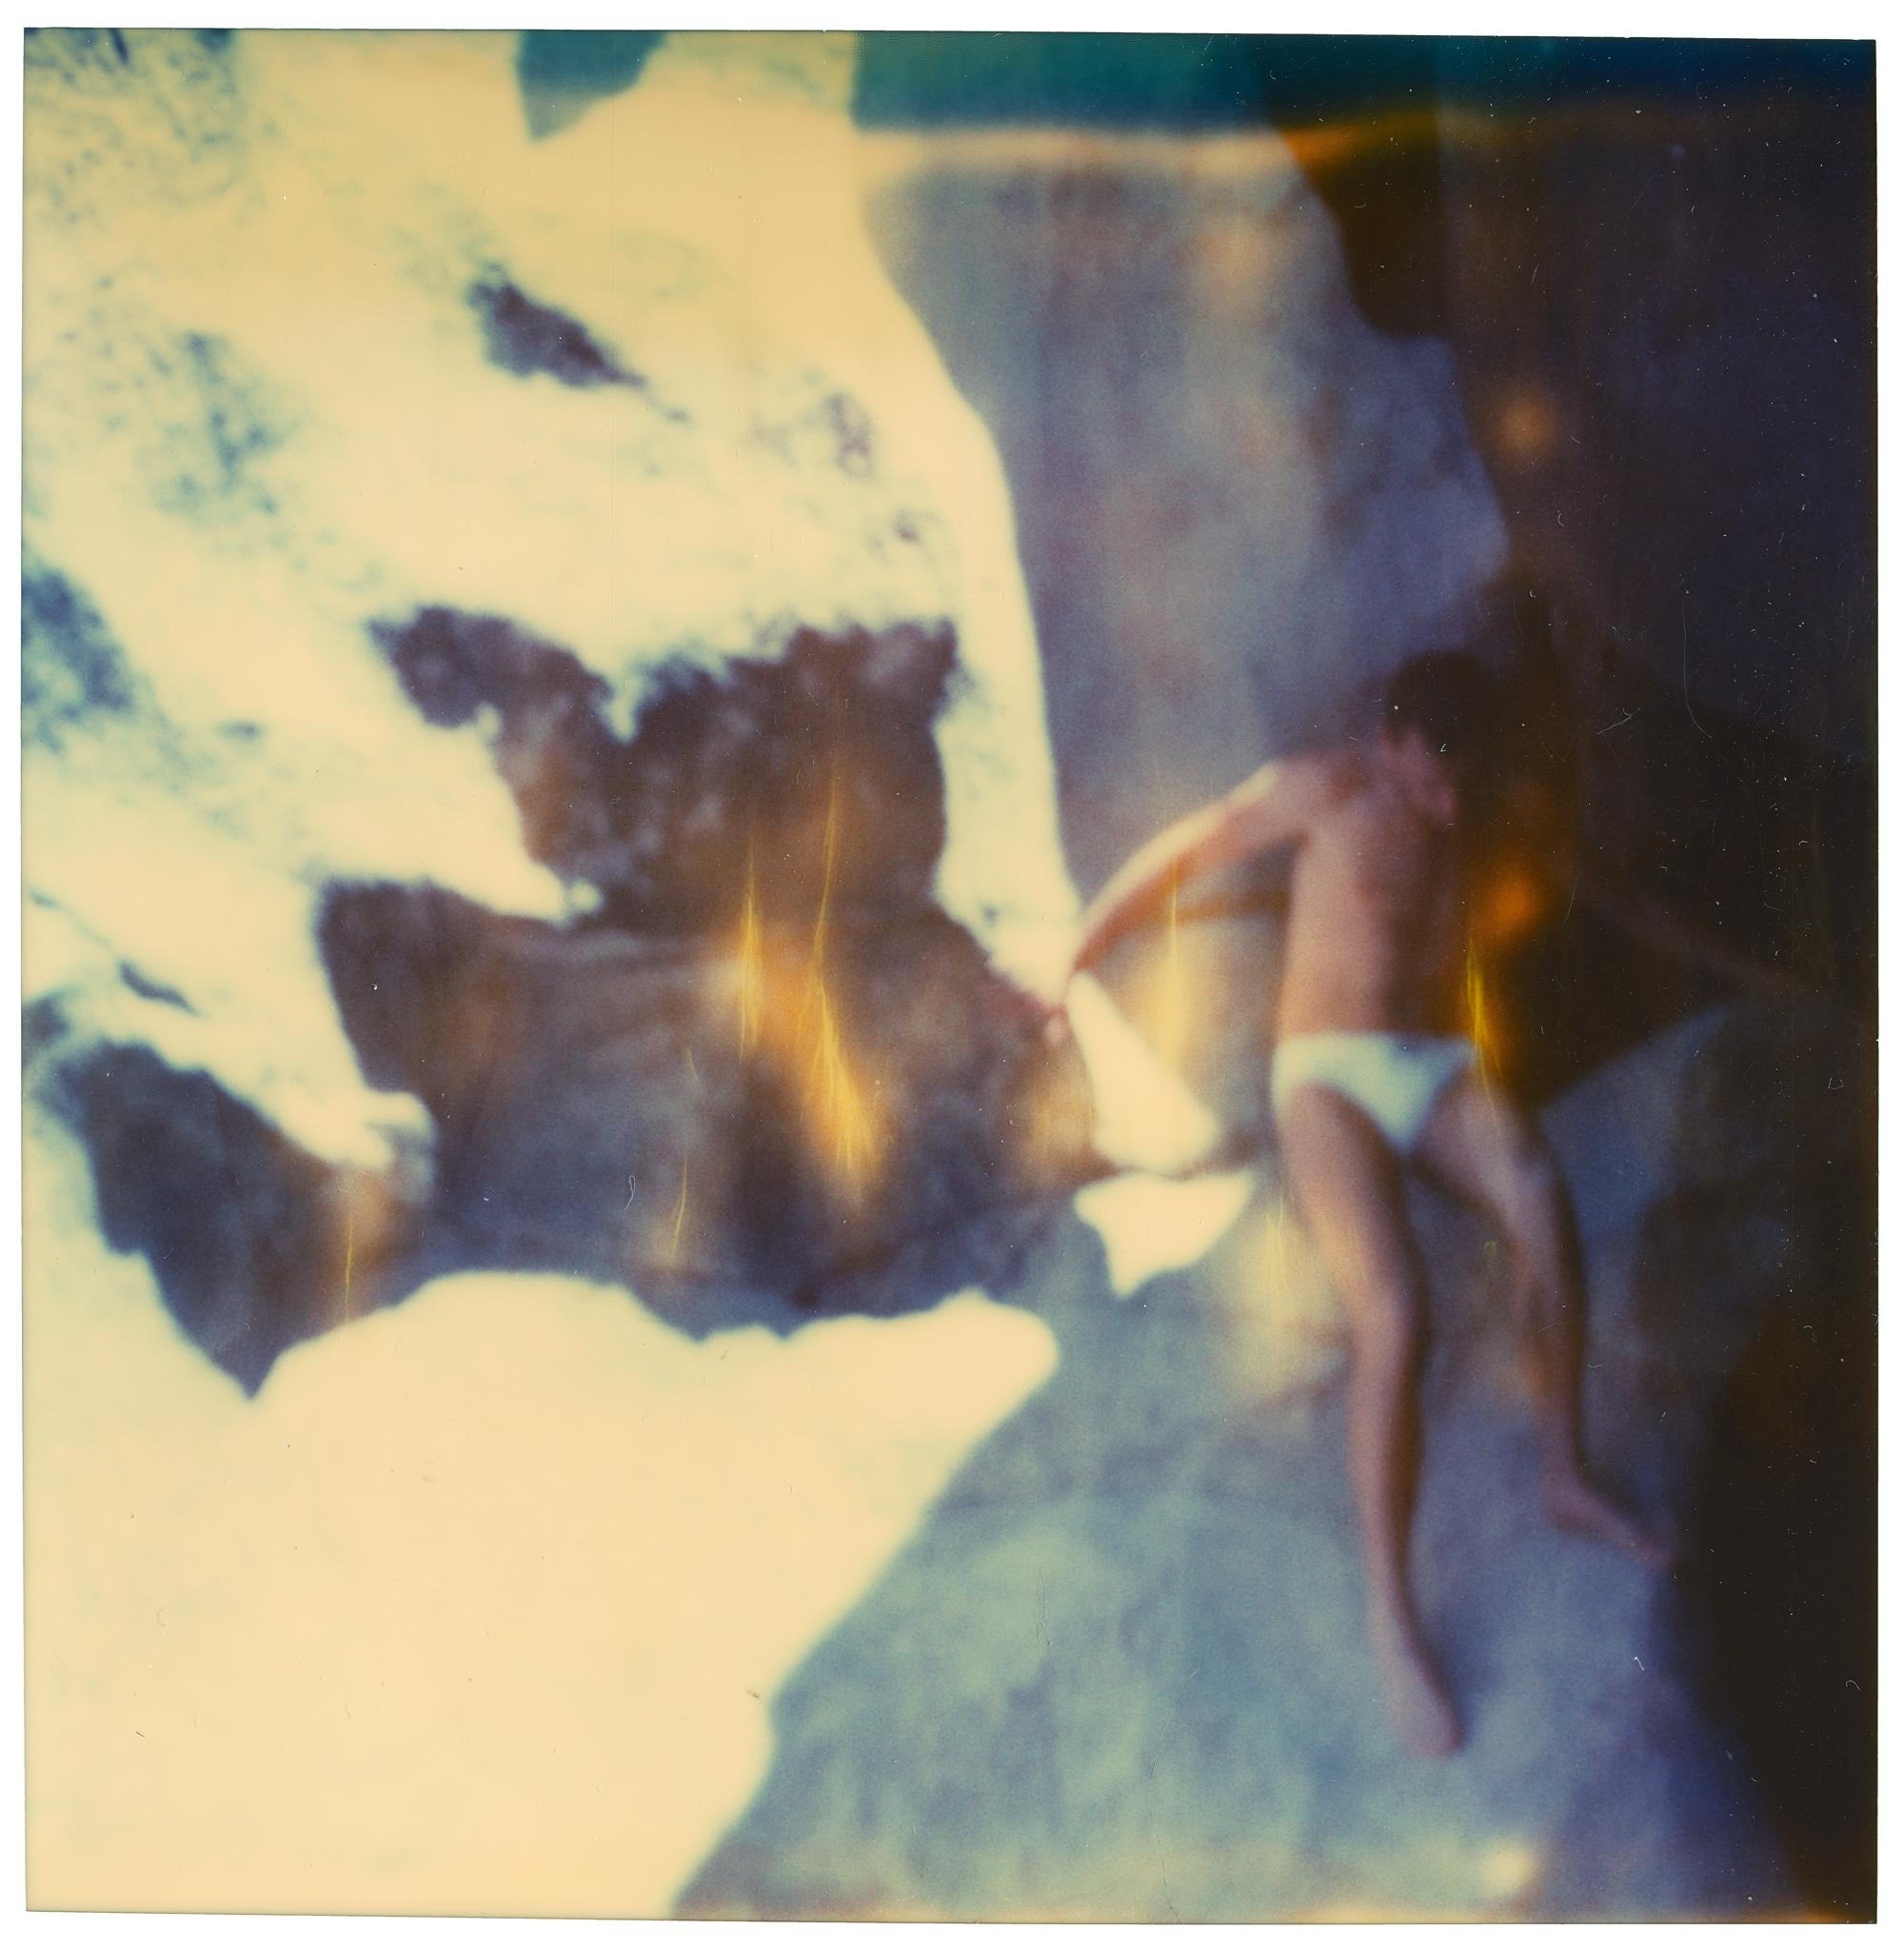 Stefanie Schneider Figurative Photograph - The Cave 01 - Planet of the Apes 10 - 21st Century, Polaroid, Abstract